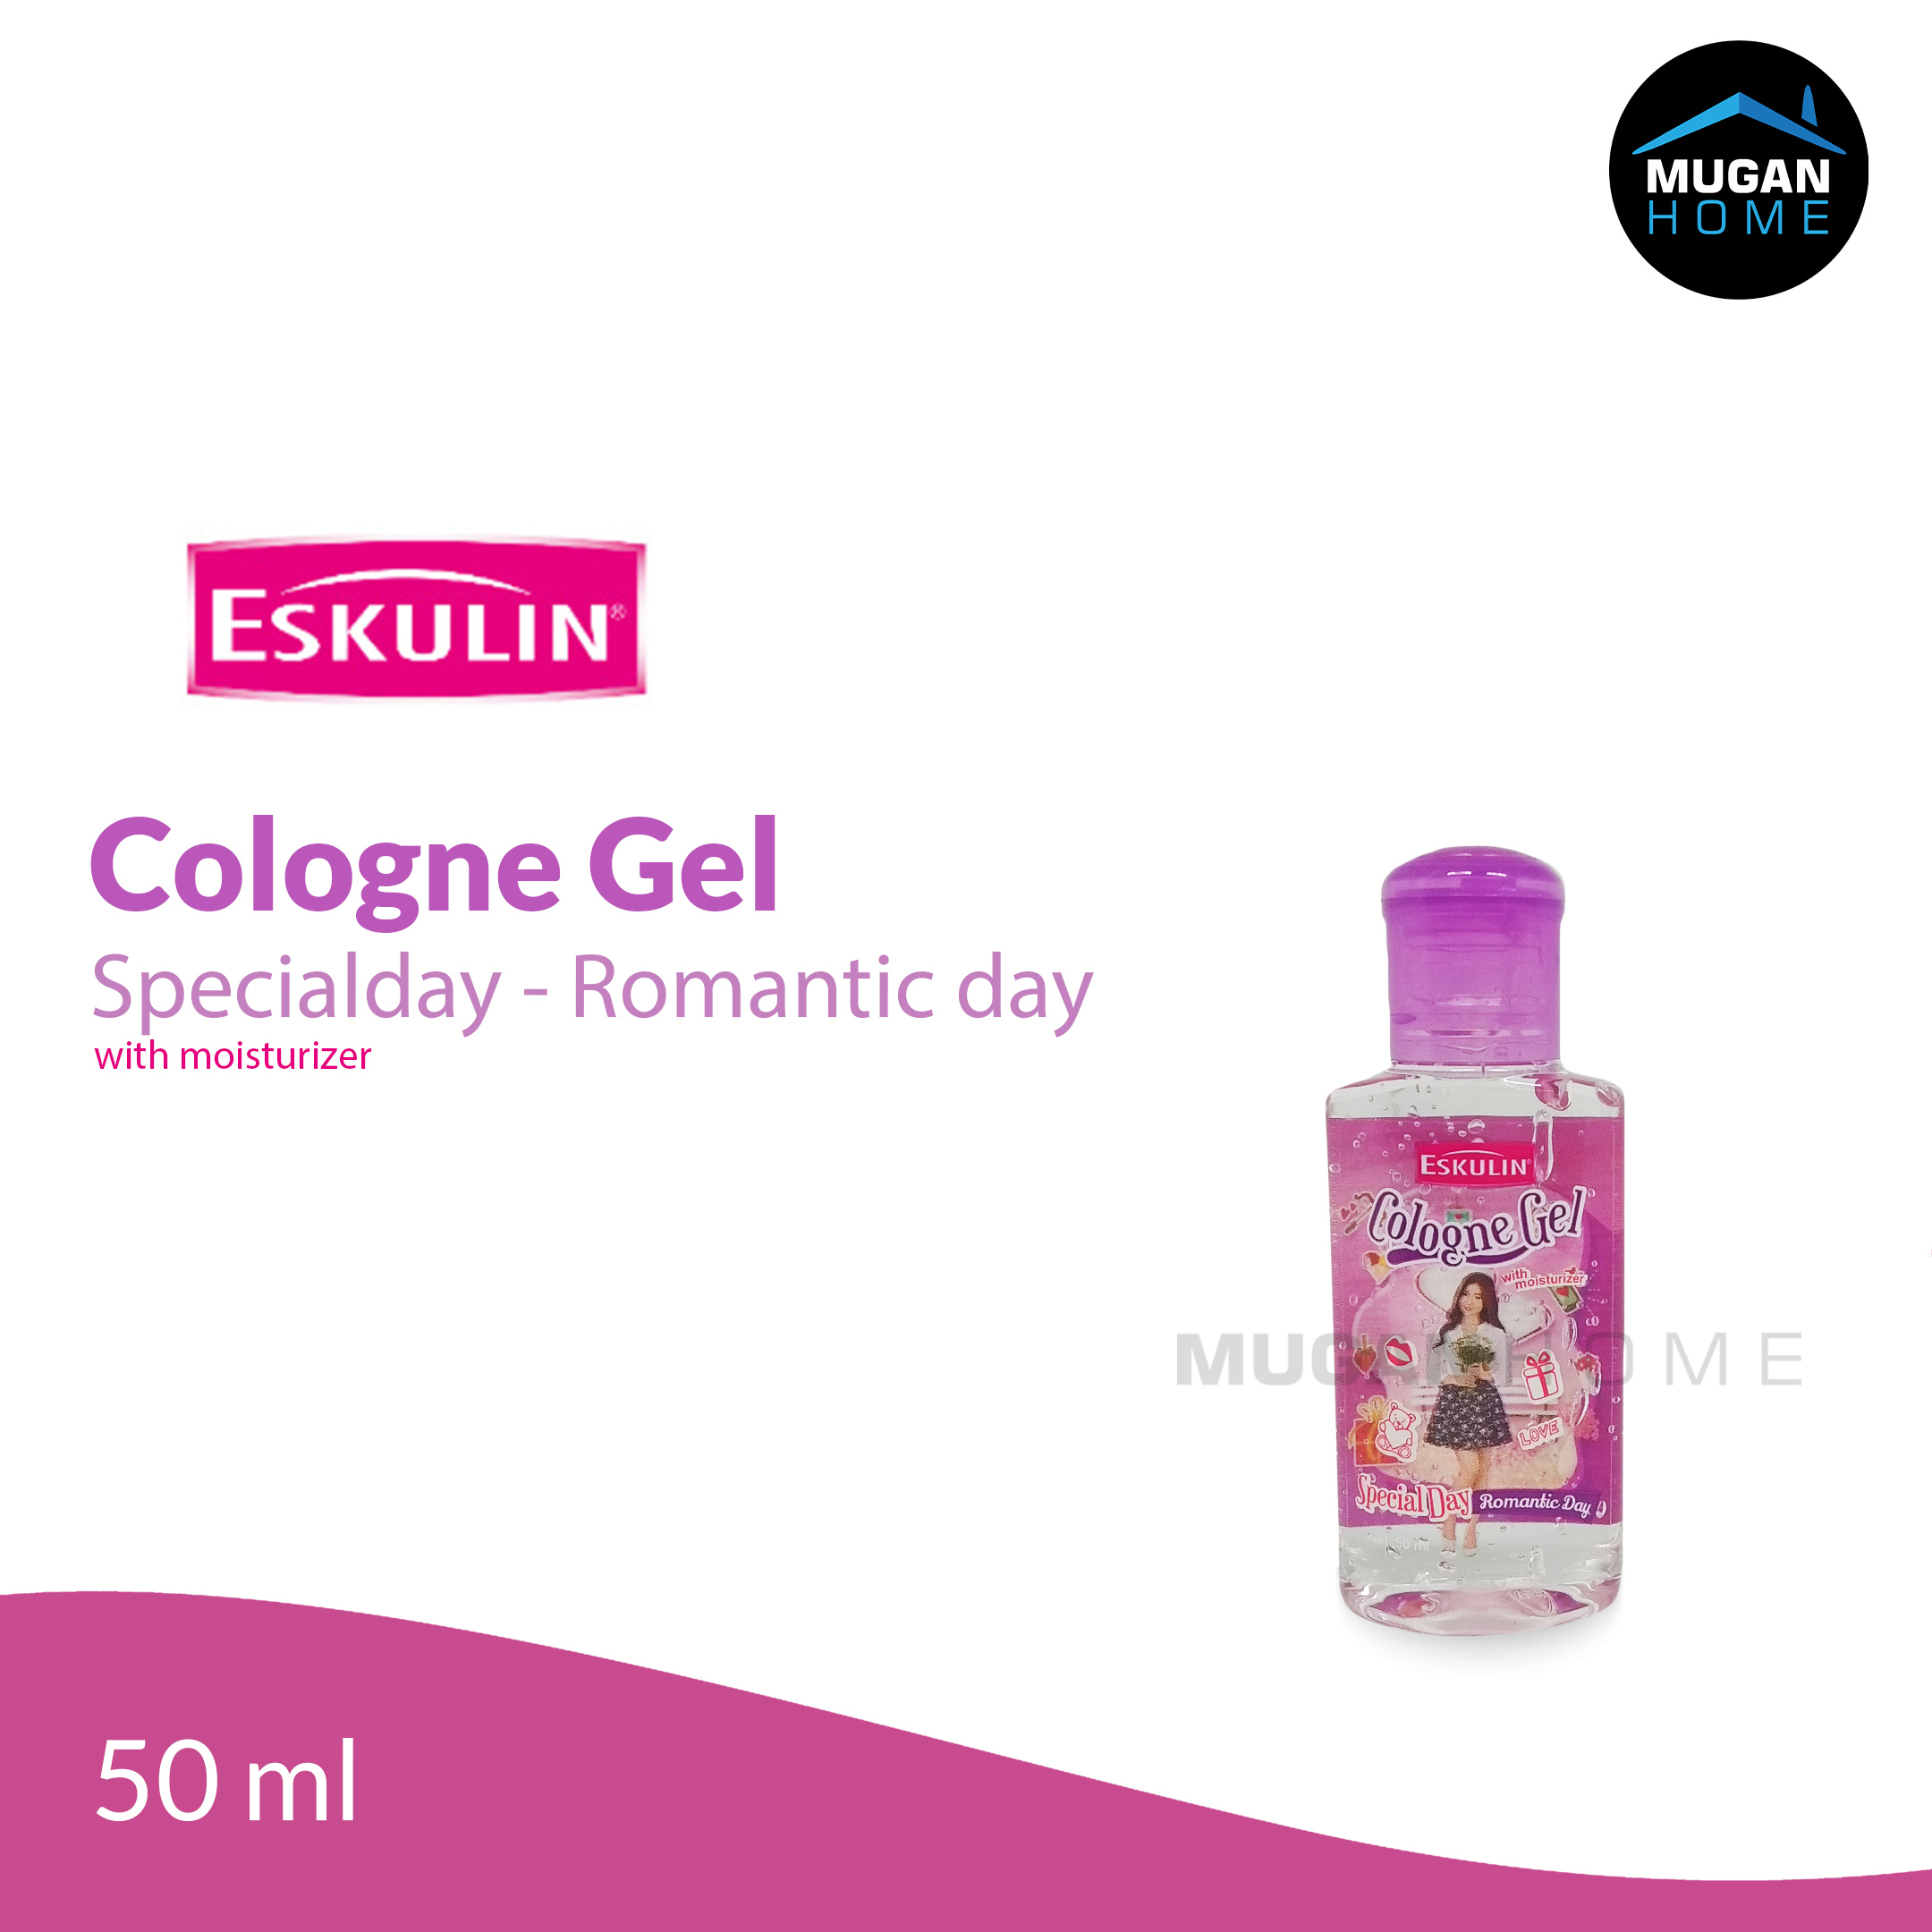 ESKULIN COLOGNE GEL 50ML SPECIAL DAY ROMANTIC DAY